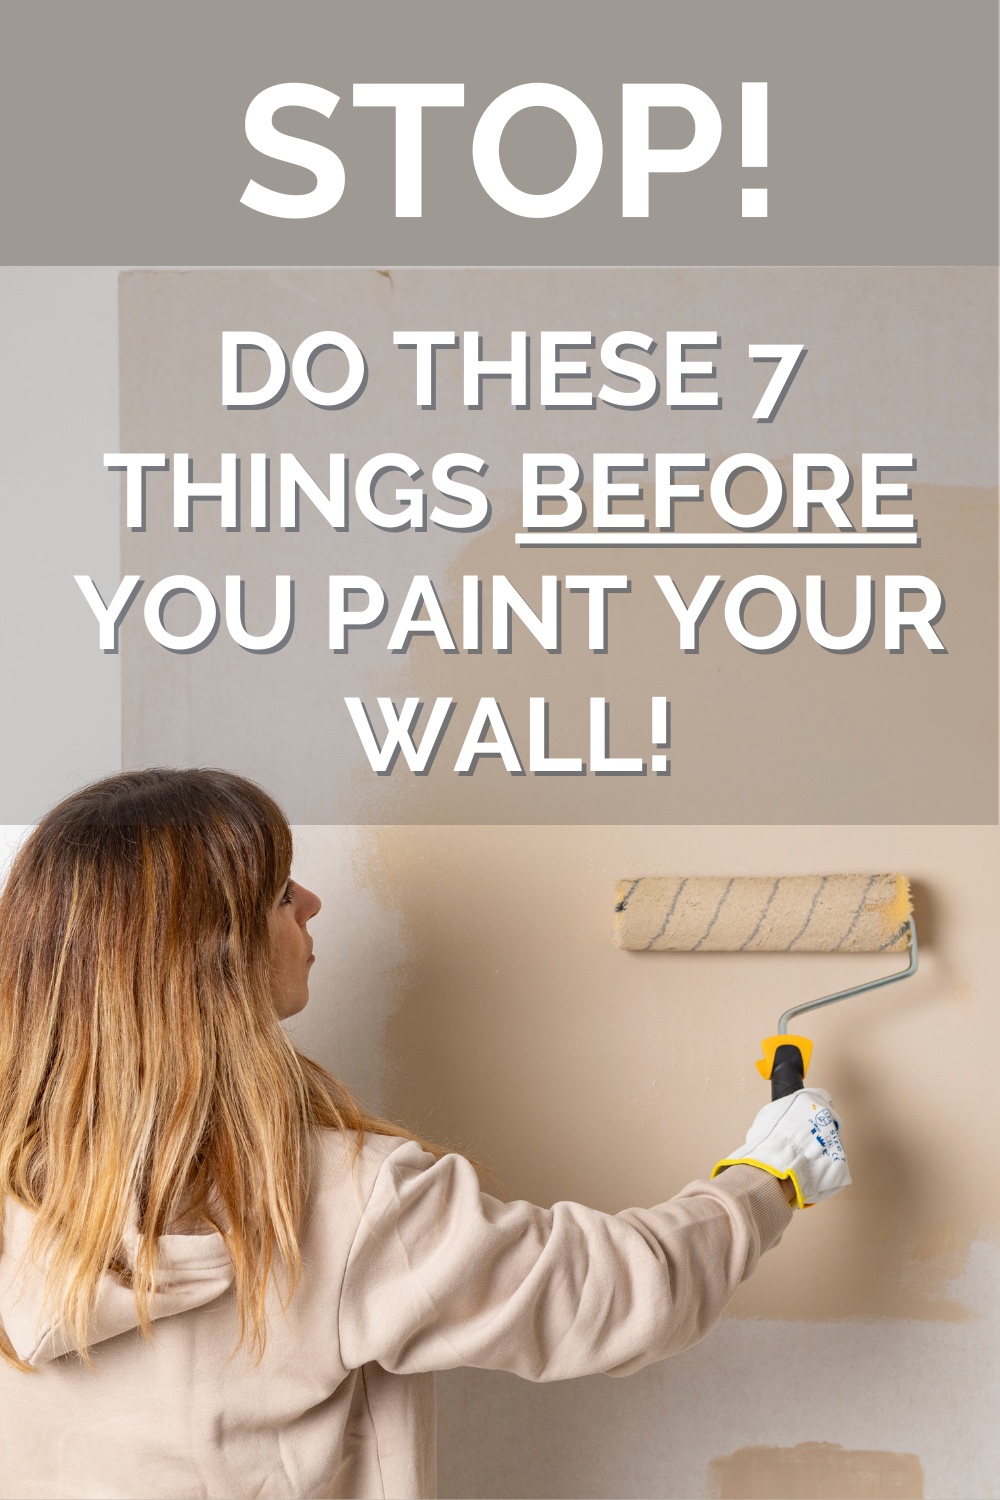 Butz Painting Service INC - Paint does not stick to dirty walls. Before  painting interior walls, we do thorough prep work so the new paint sticks.